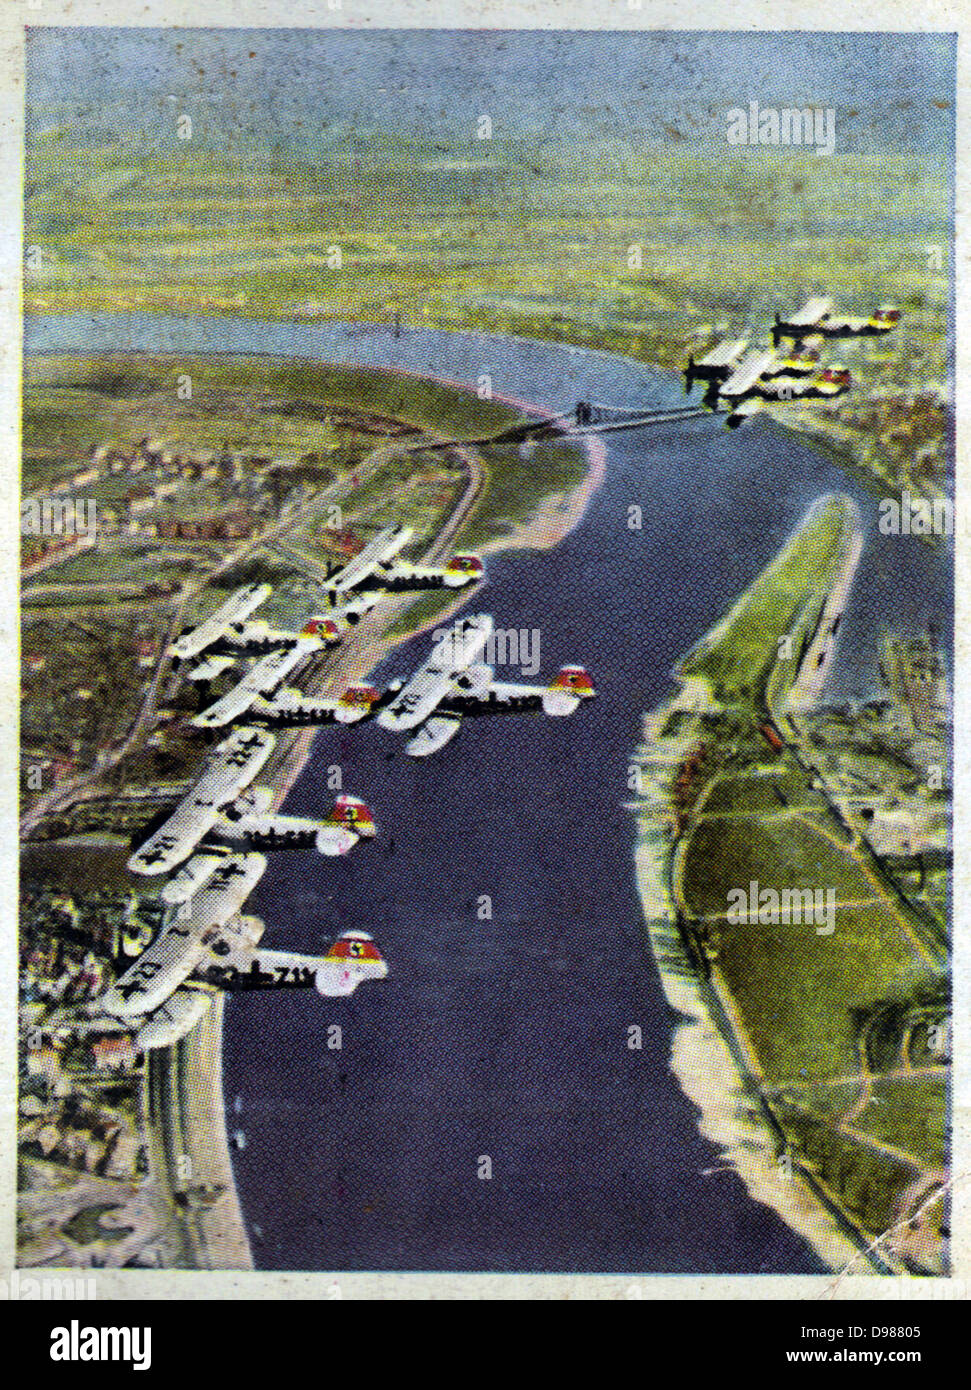 German re-armament and militarisation: A squadron of fighter planes over the Rhine. From series of 270 cigarette cards 'Die Deutsche Wehrmacht', Dresden, 1936. Stock Photo